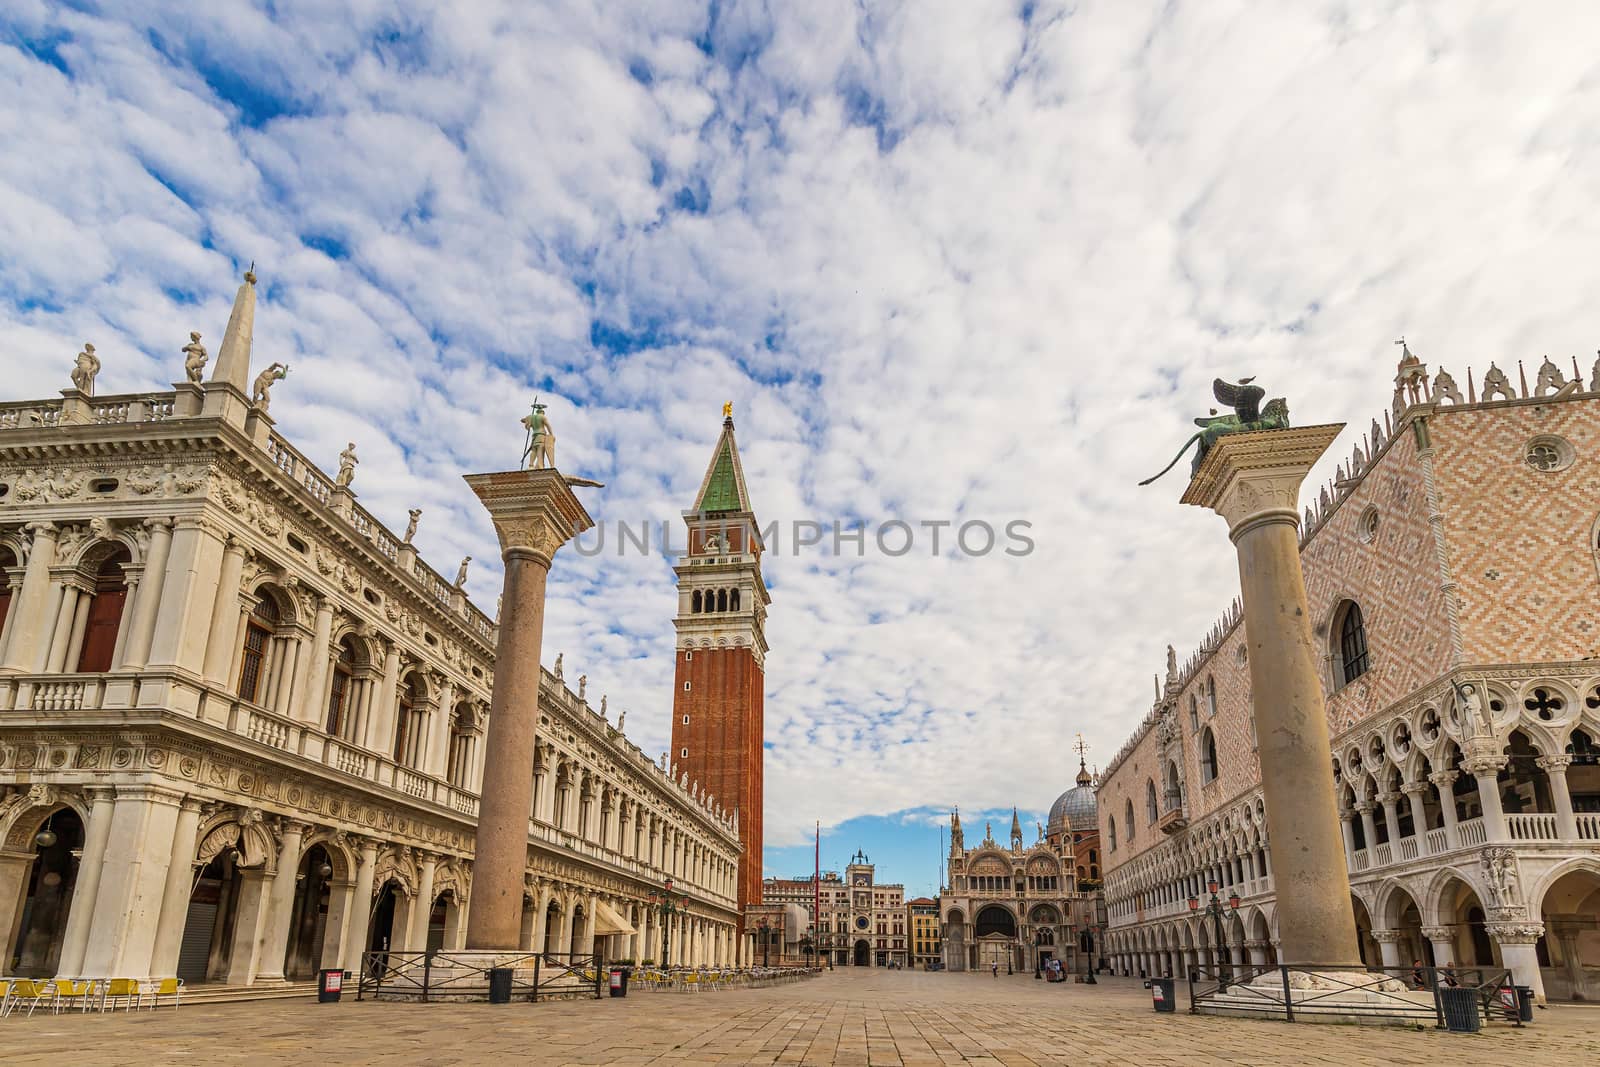 A view of the Campanile at St Mark's Square in Venice, Italy by COffe